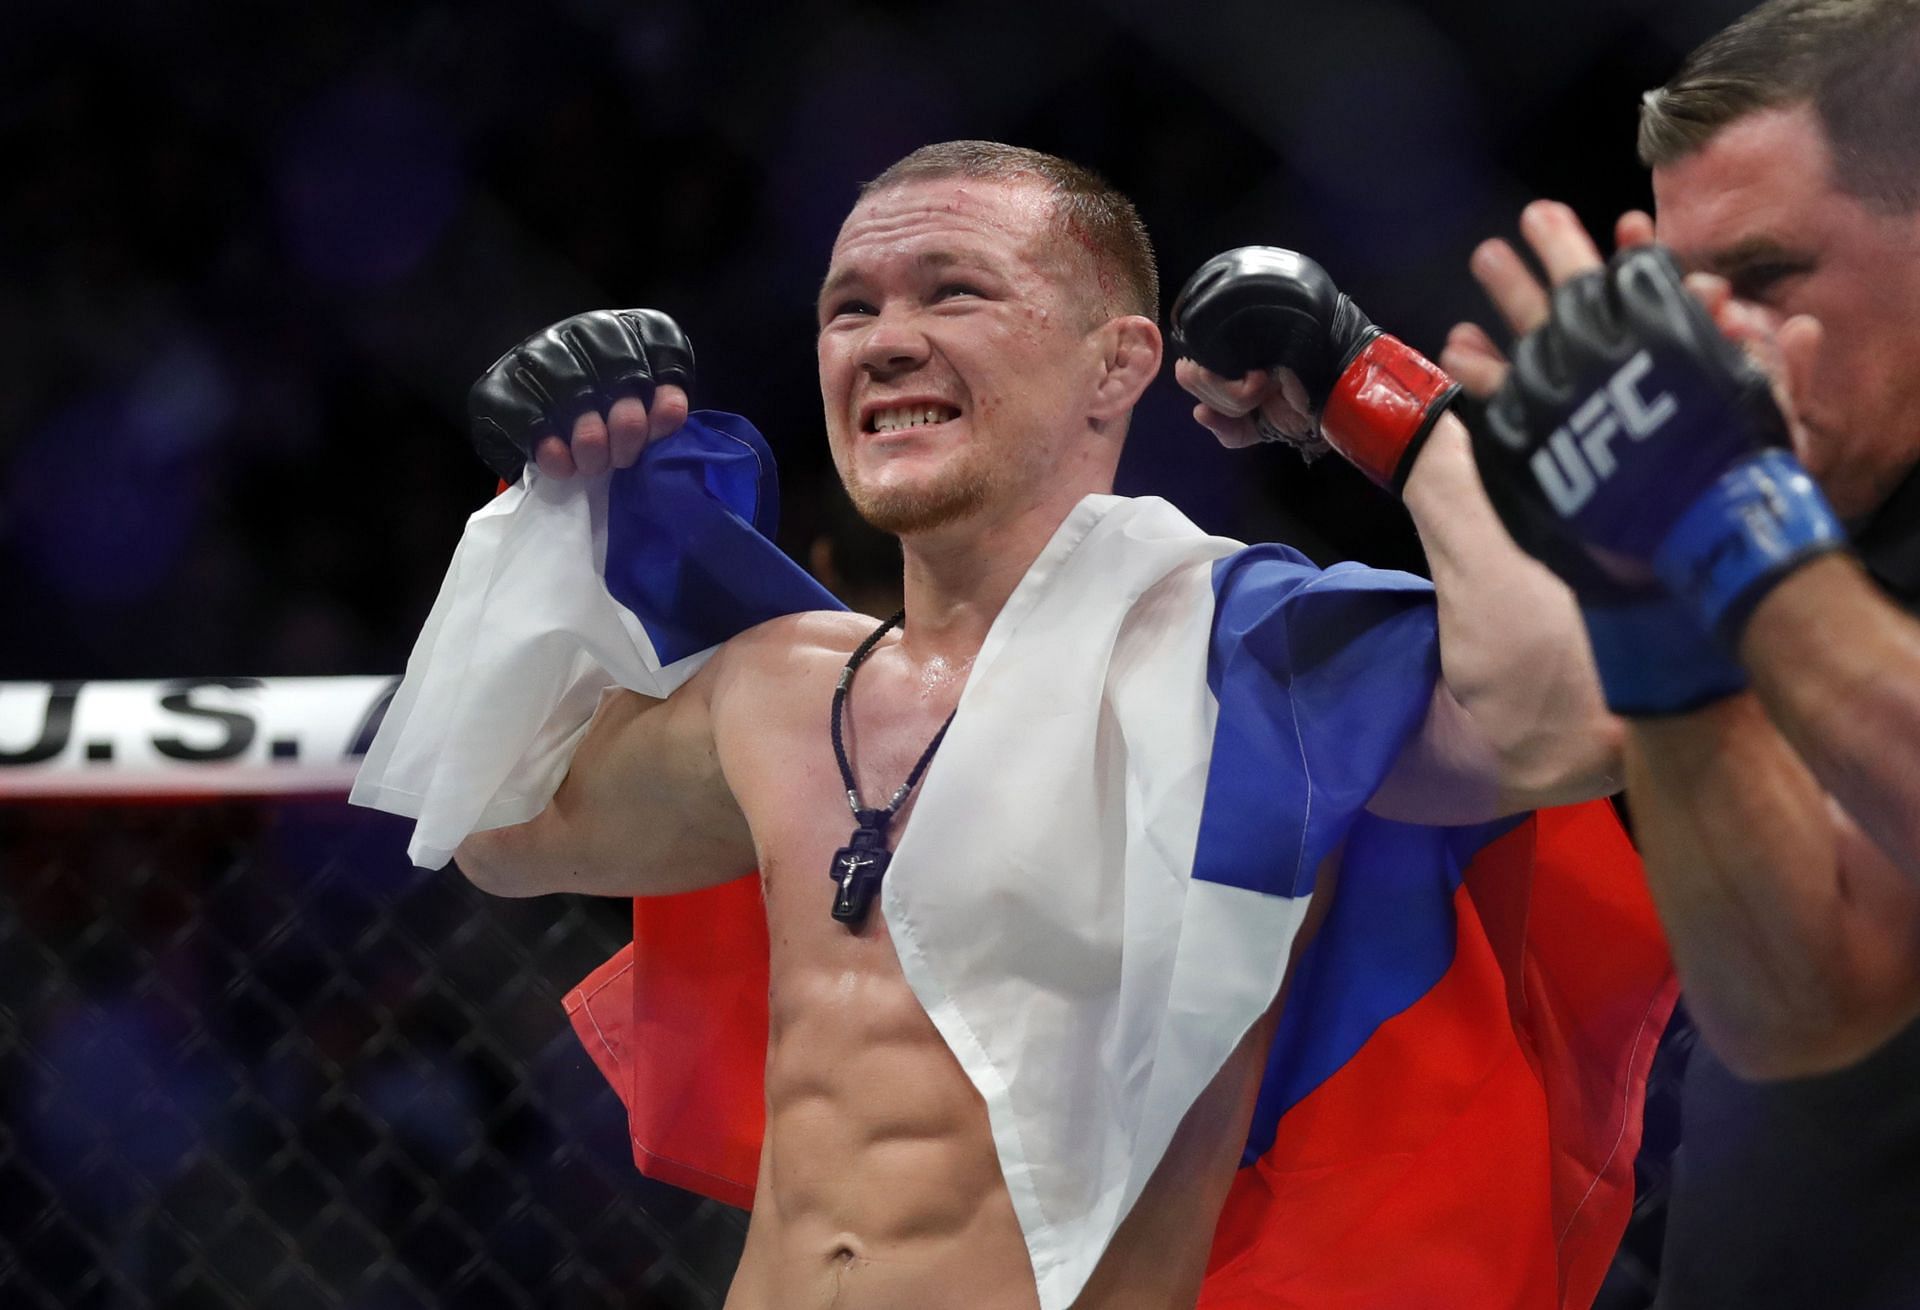 Petr Yan has quickly slipped down the ladder after losing the bantamweight title